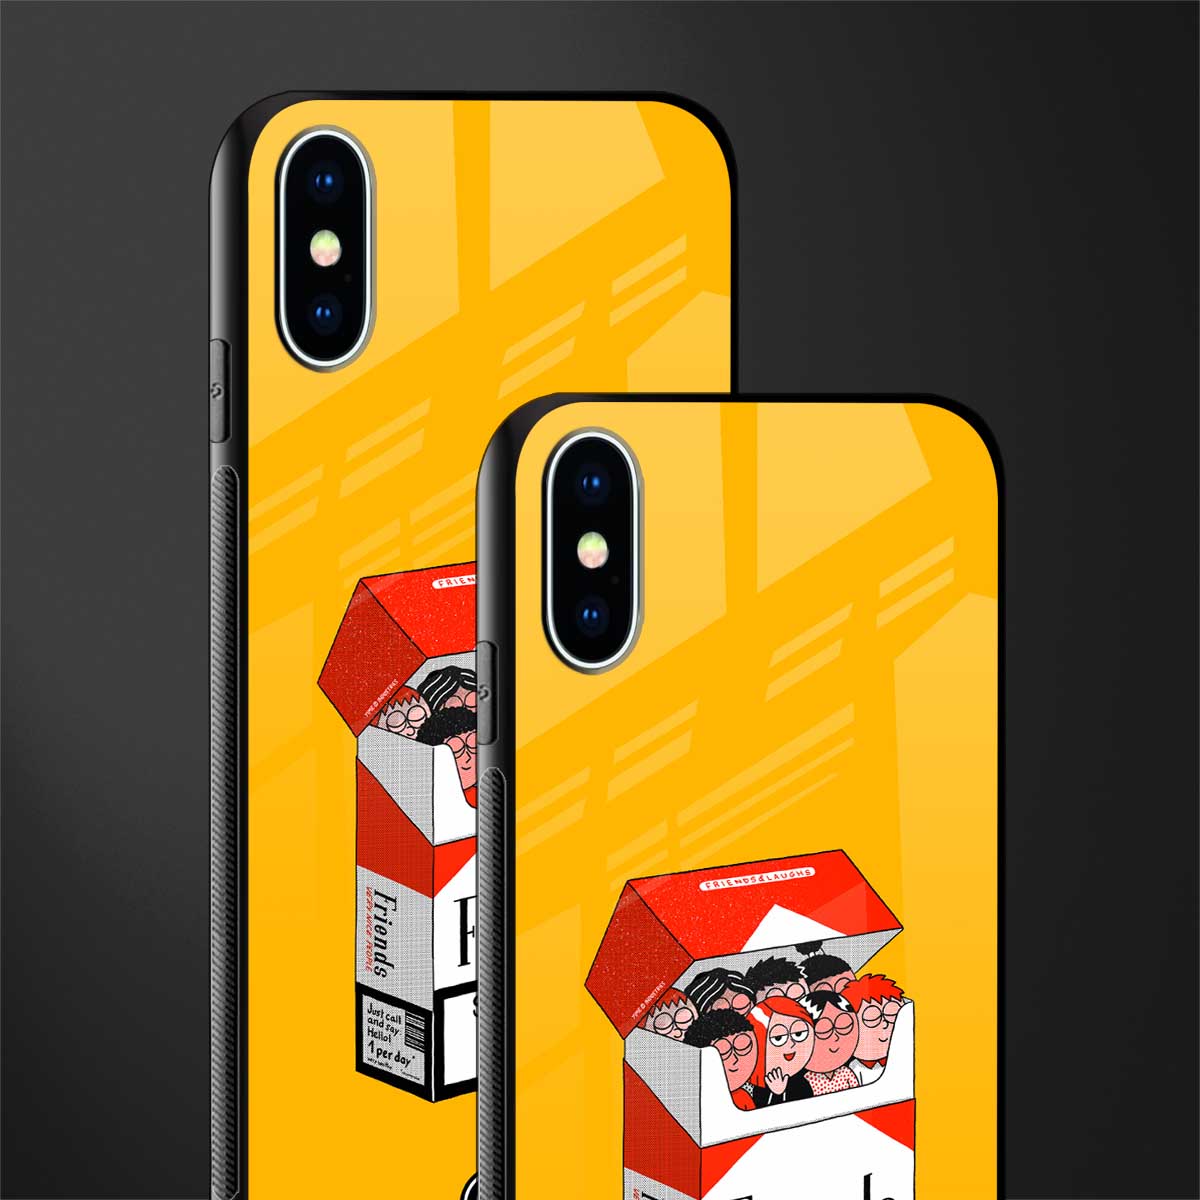 socializing can cause happiness glass case for iphone x image-2